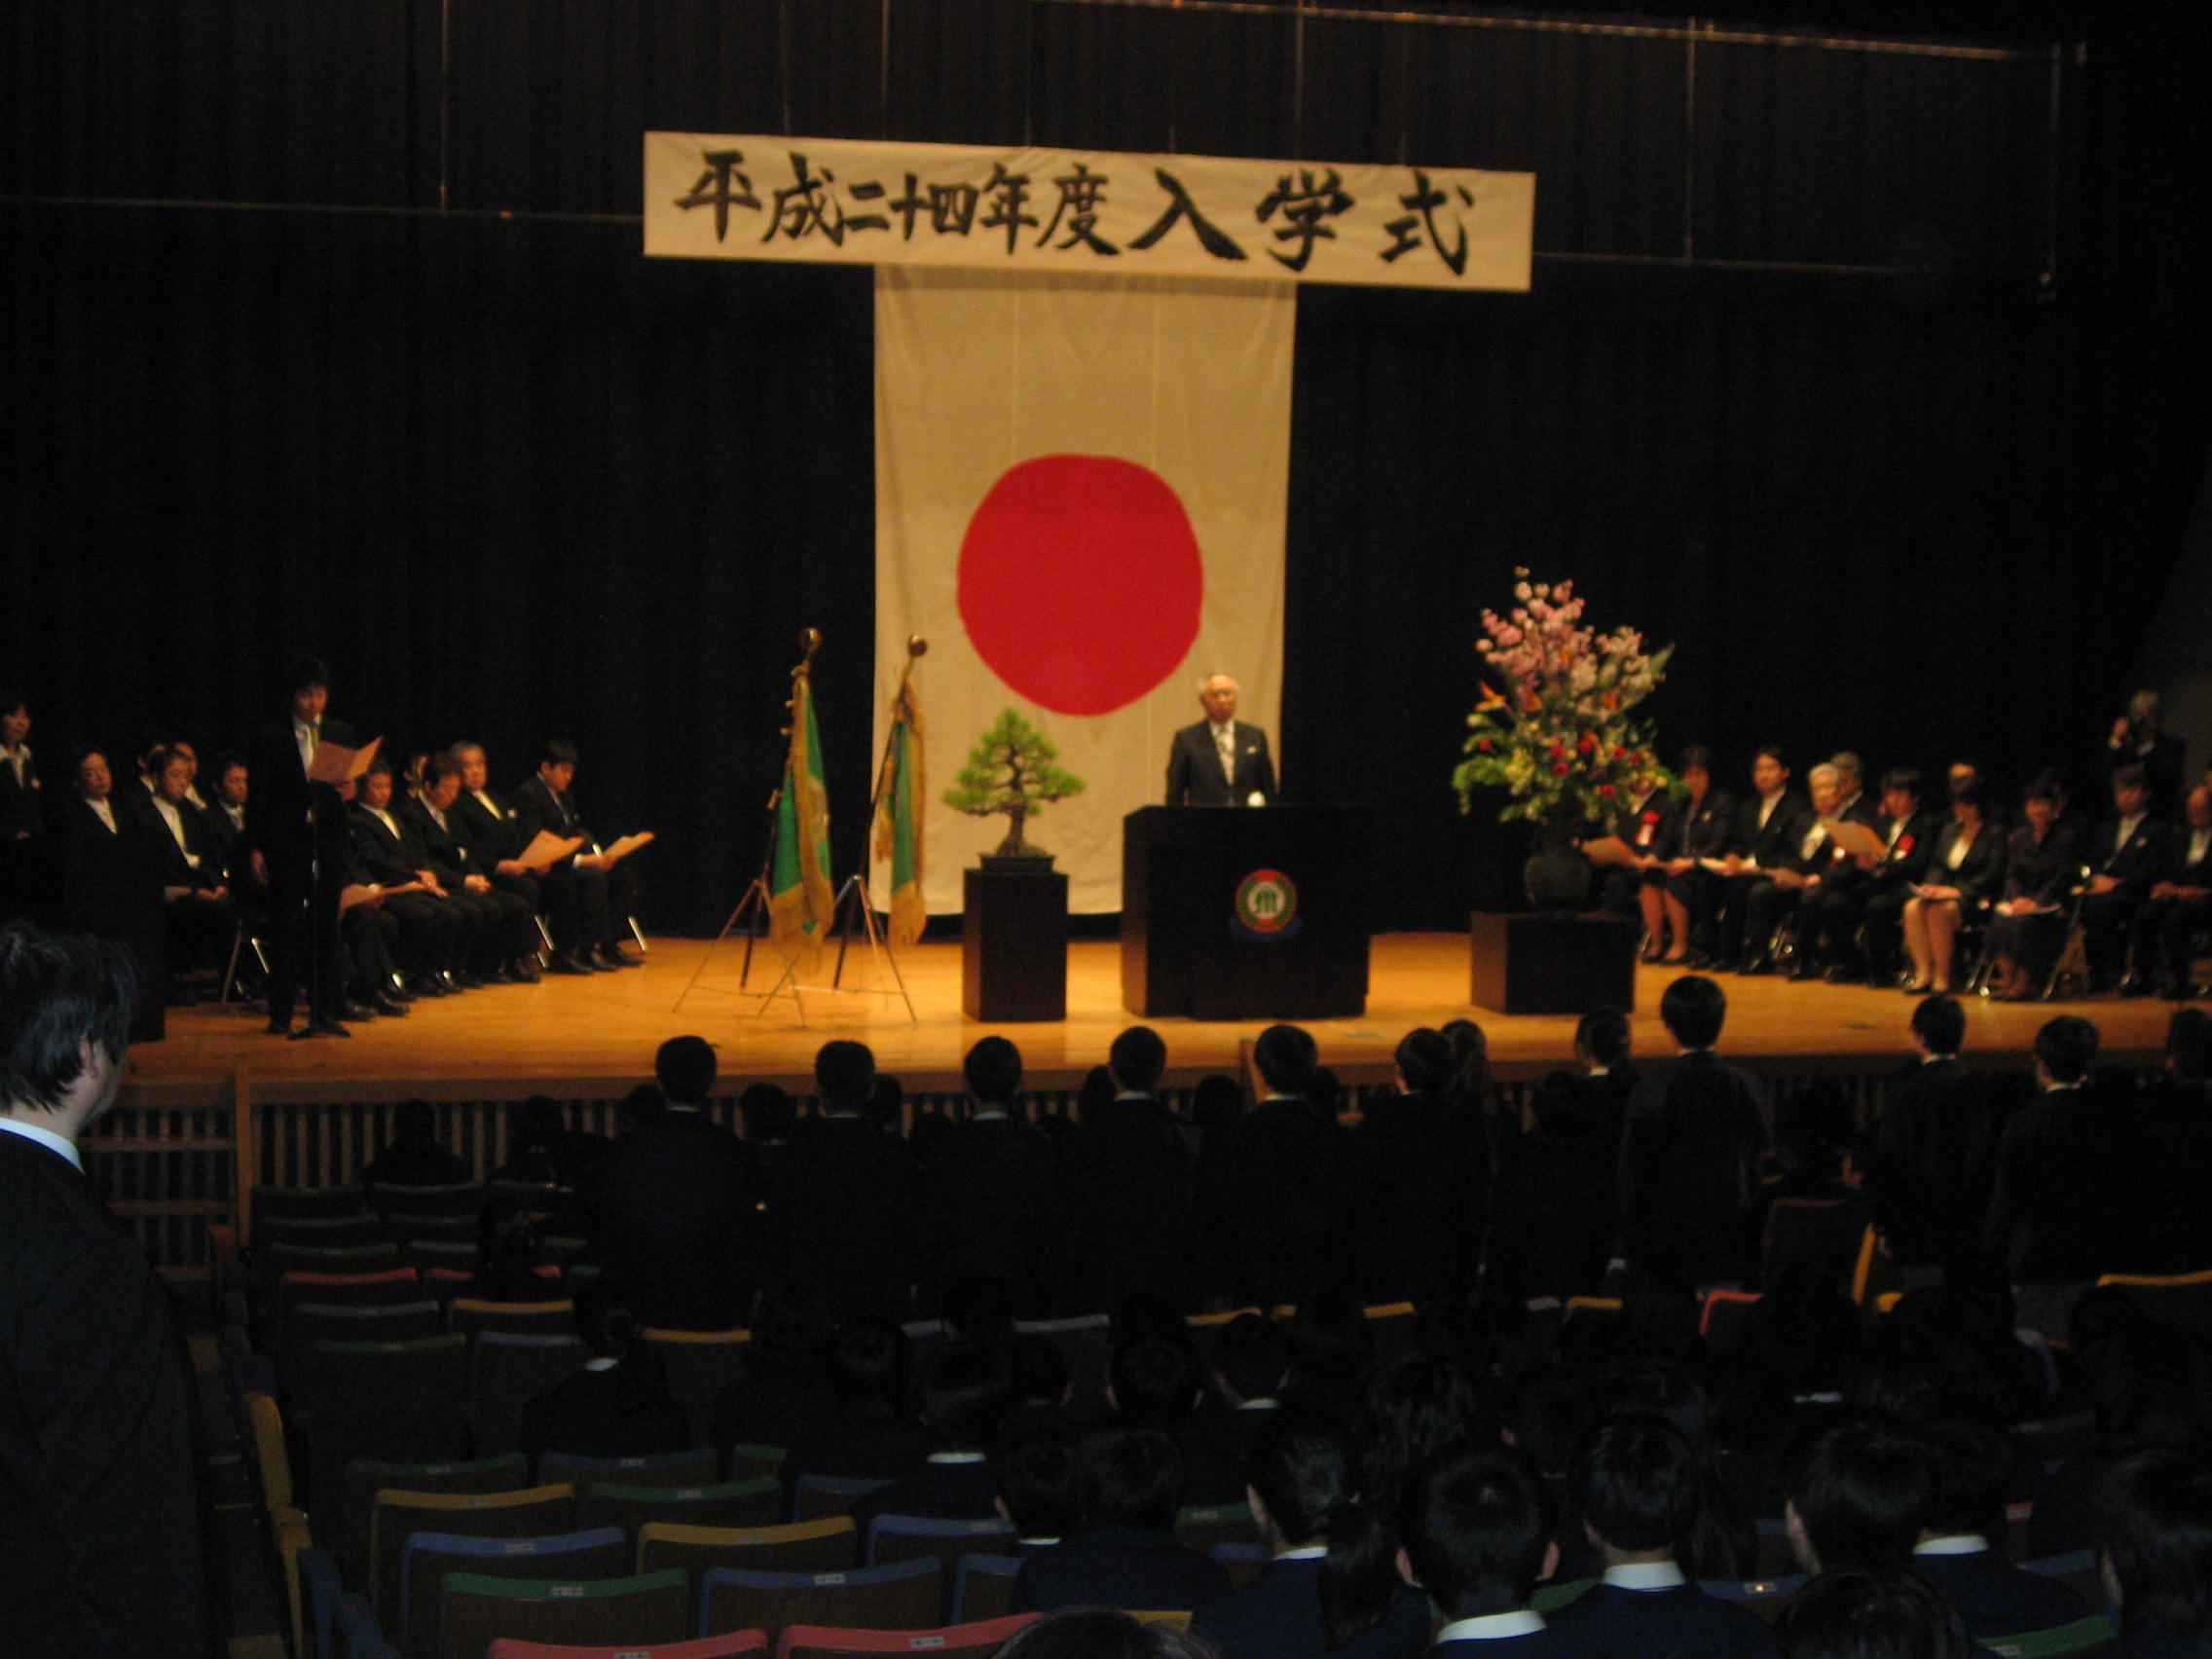 The entrance ceremony